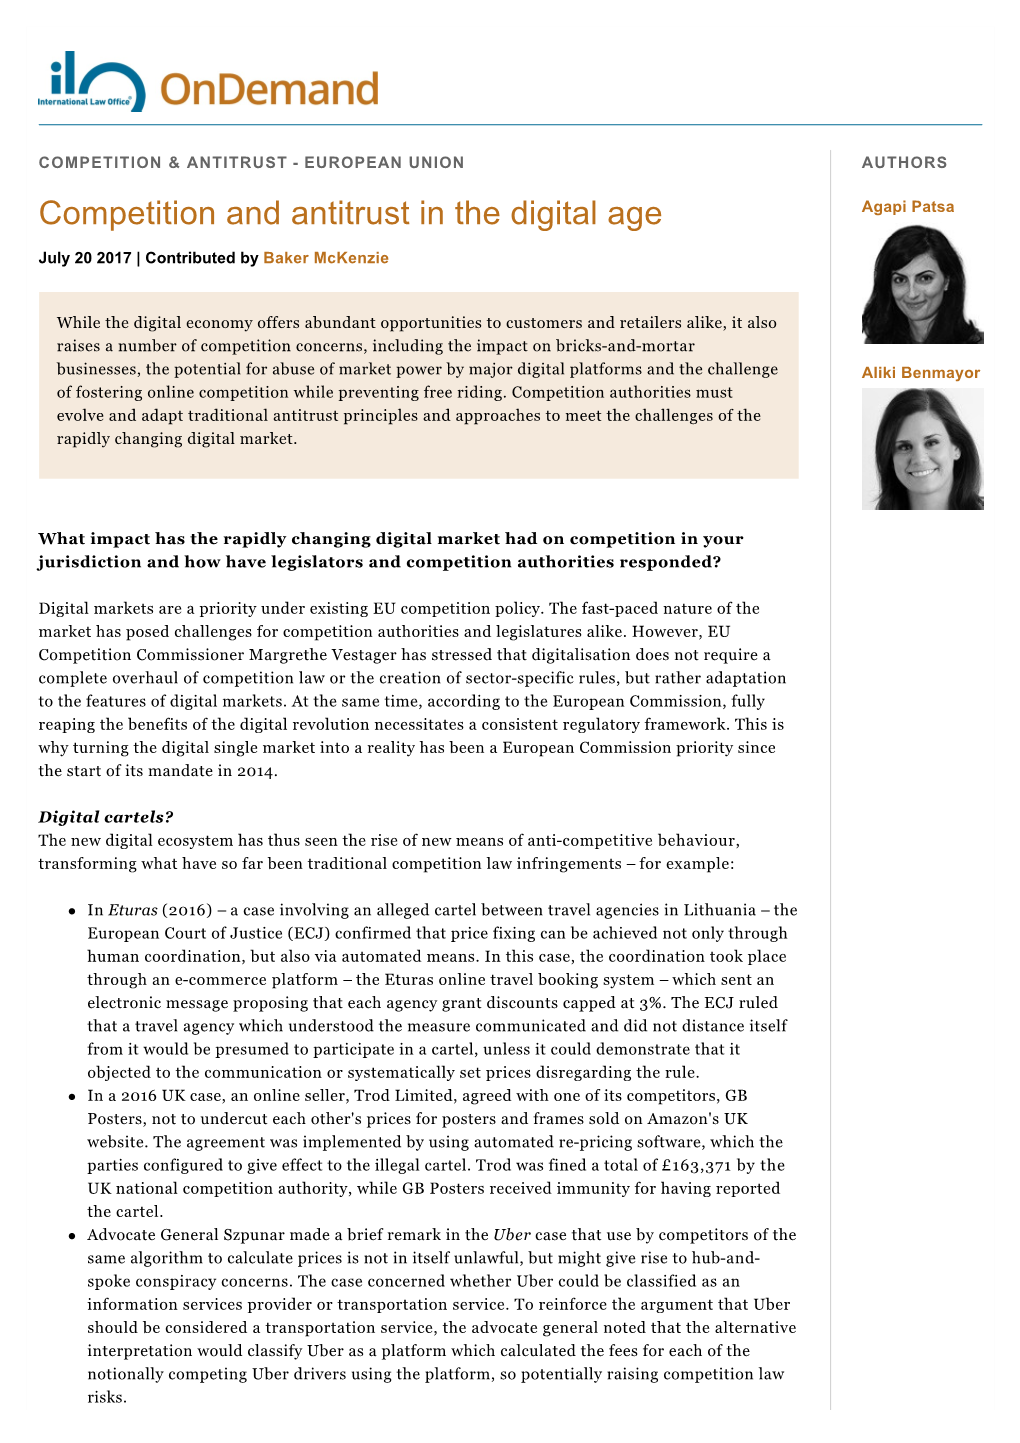 Competition and Antitrust in the Digital Age Agapi Patsa